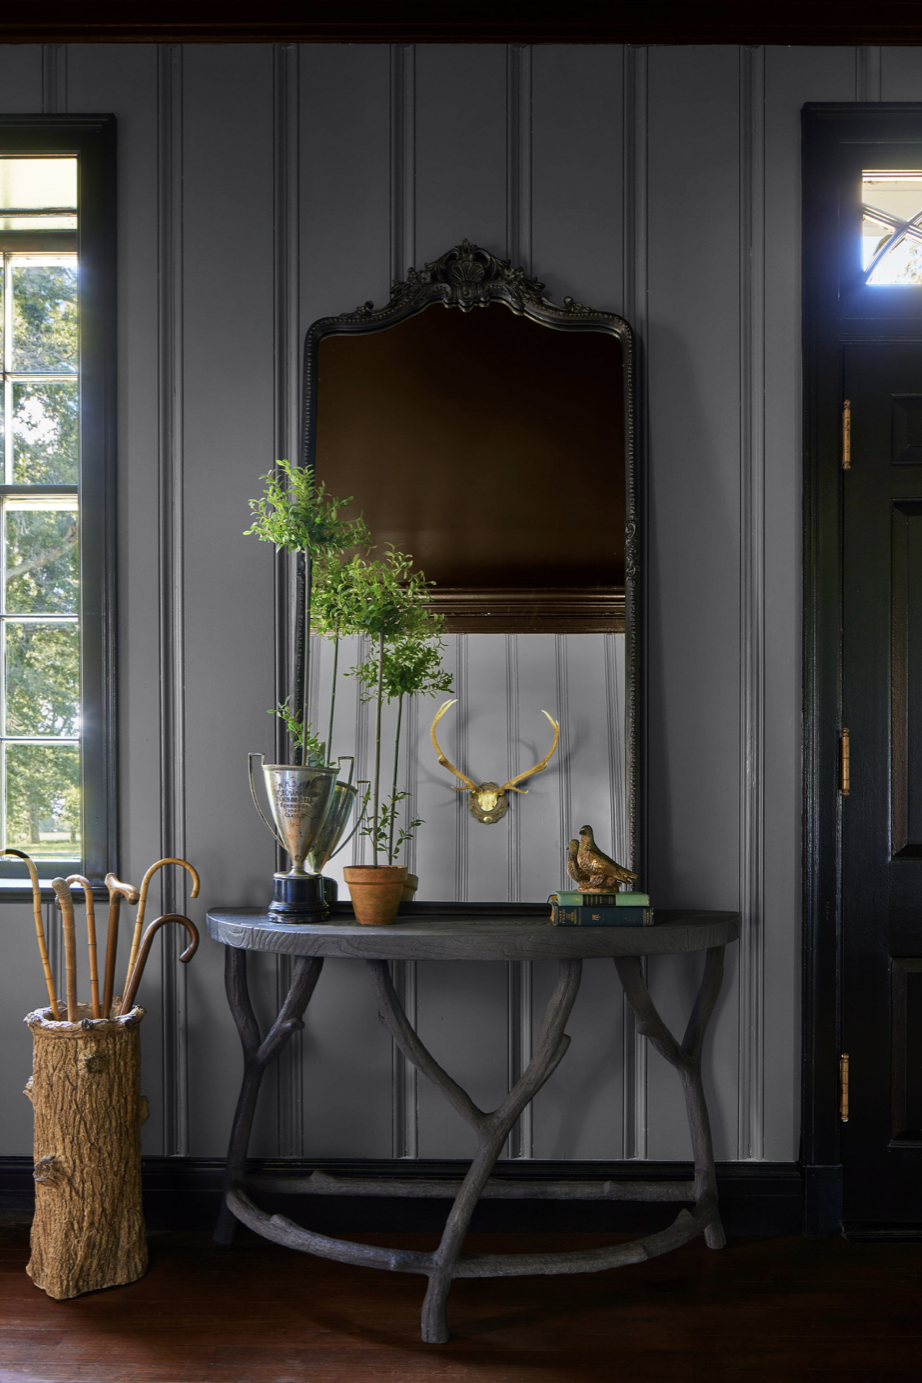 vignette of entryway with large mirror placed on demilune